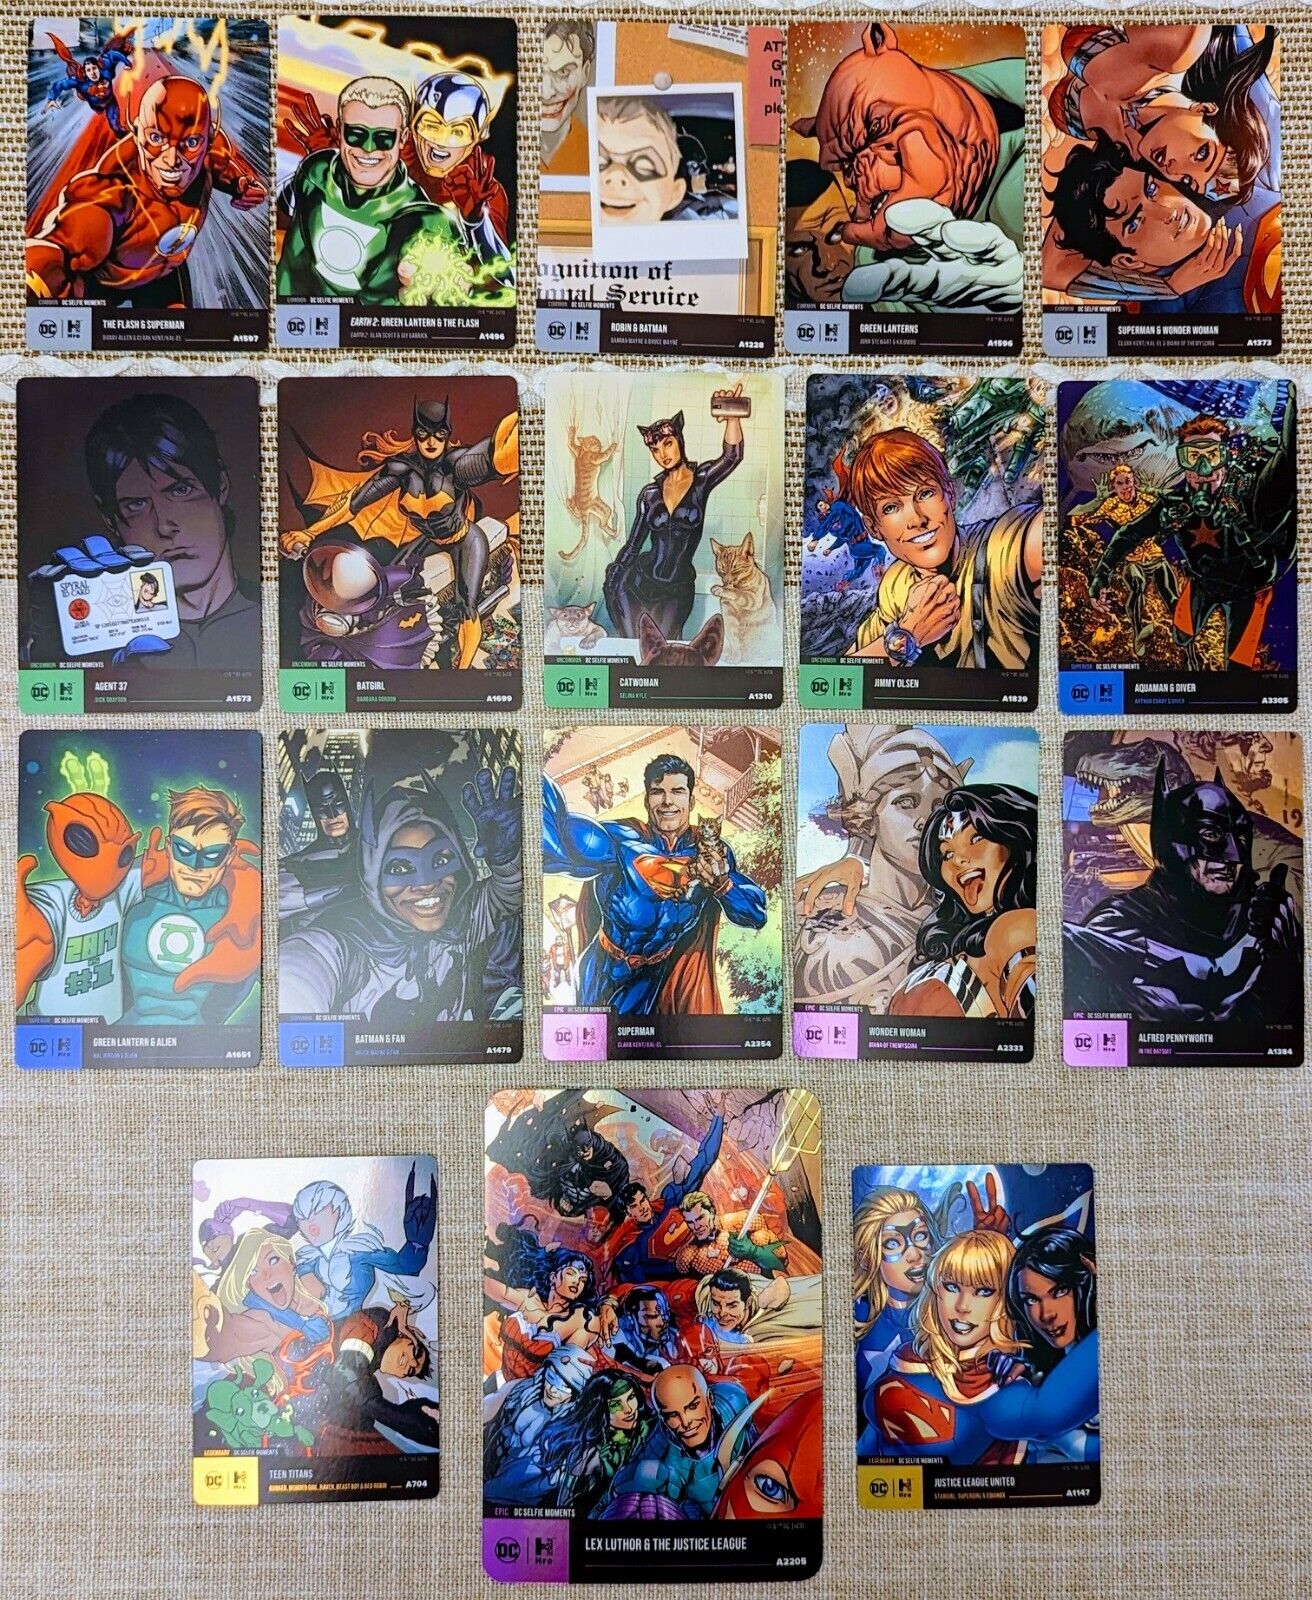 *Physical Only* DC Selfie Moments Near Complete Set Of 18 Cards, No Mythic